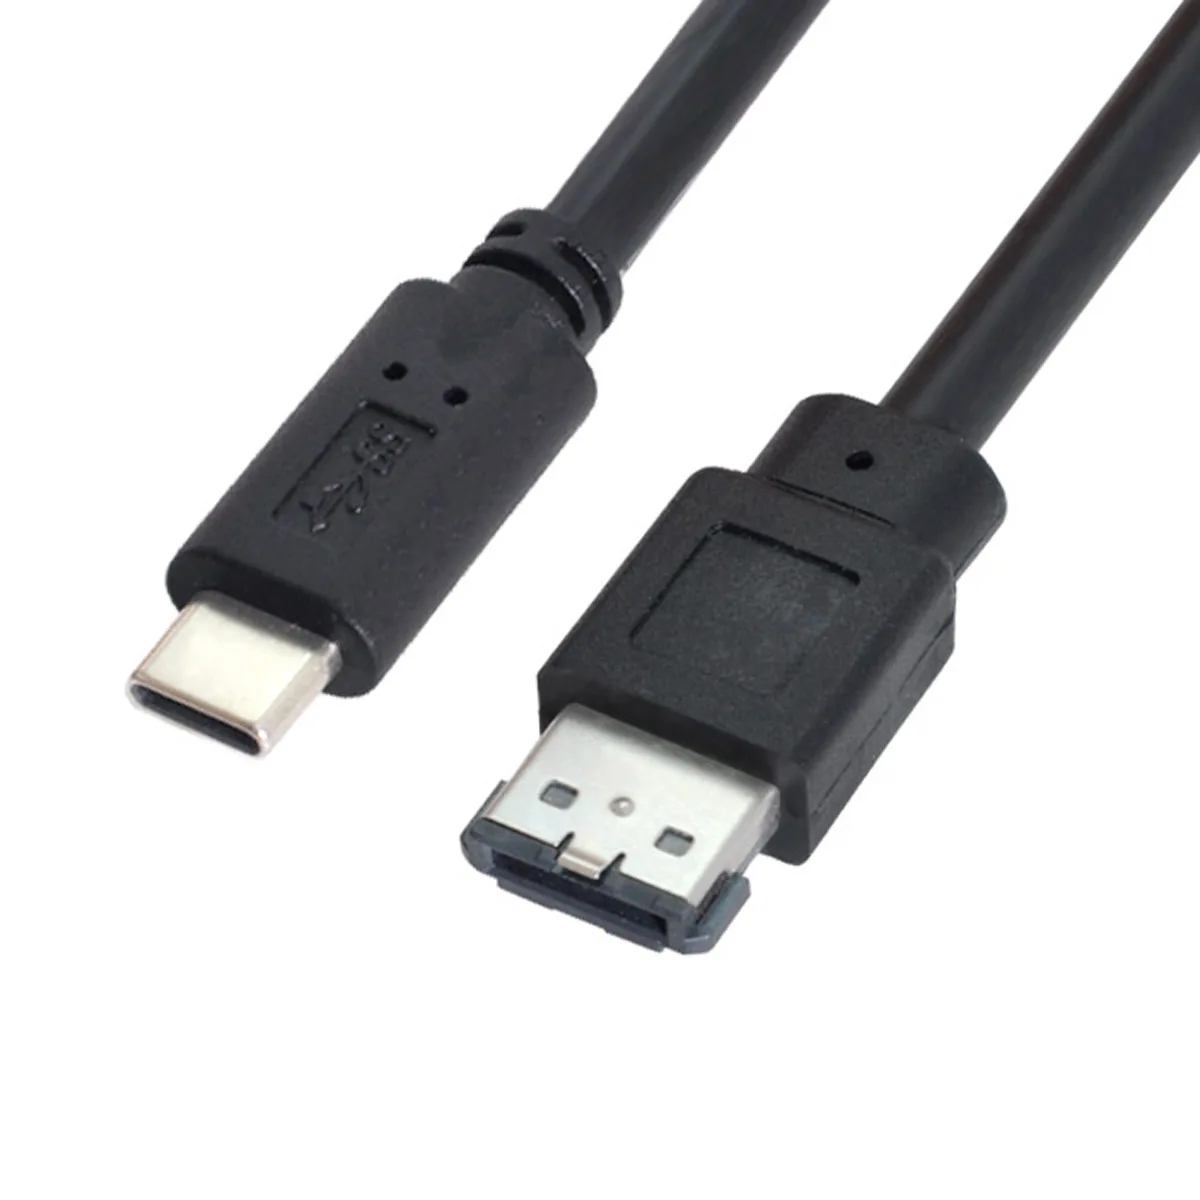 

CY esata to usb cable cord Type-C USB-C to Power Over eSATA DC5V Adapter USB3.0 to HDD/SSD/ODD eSATAp Converter